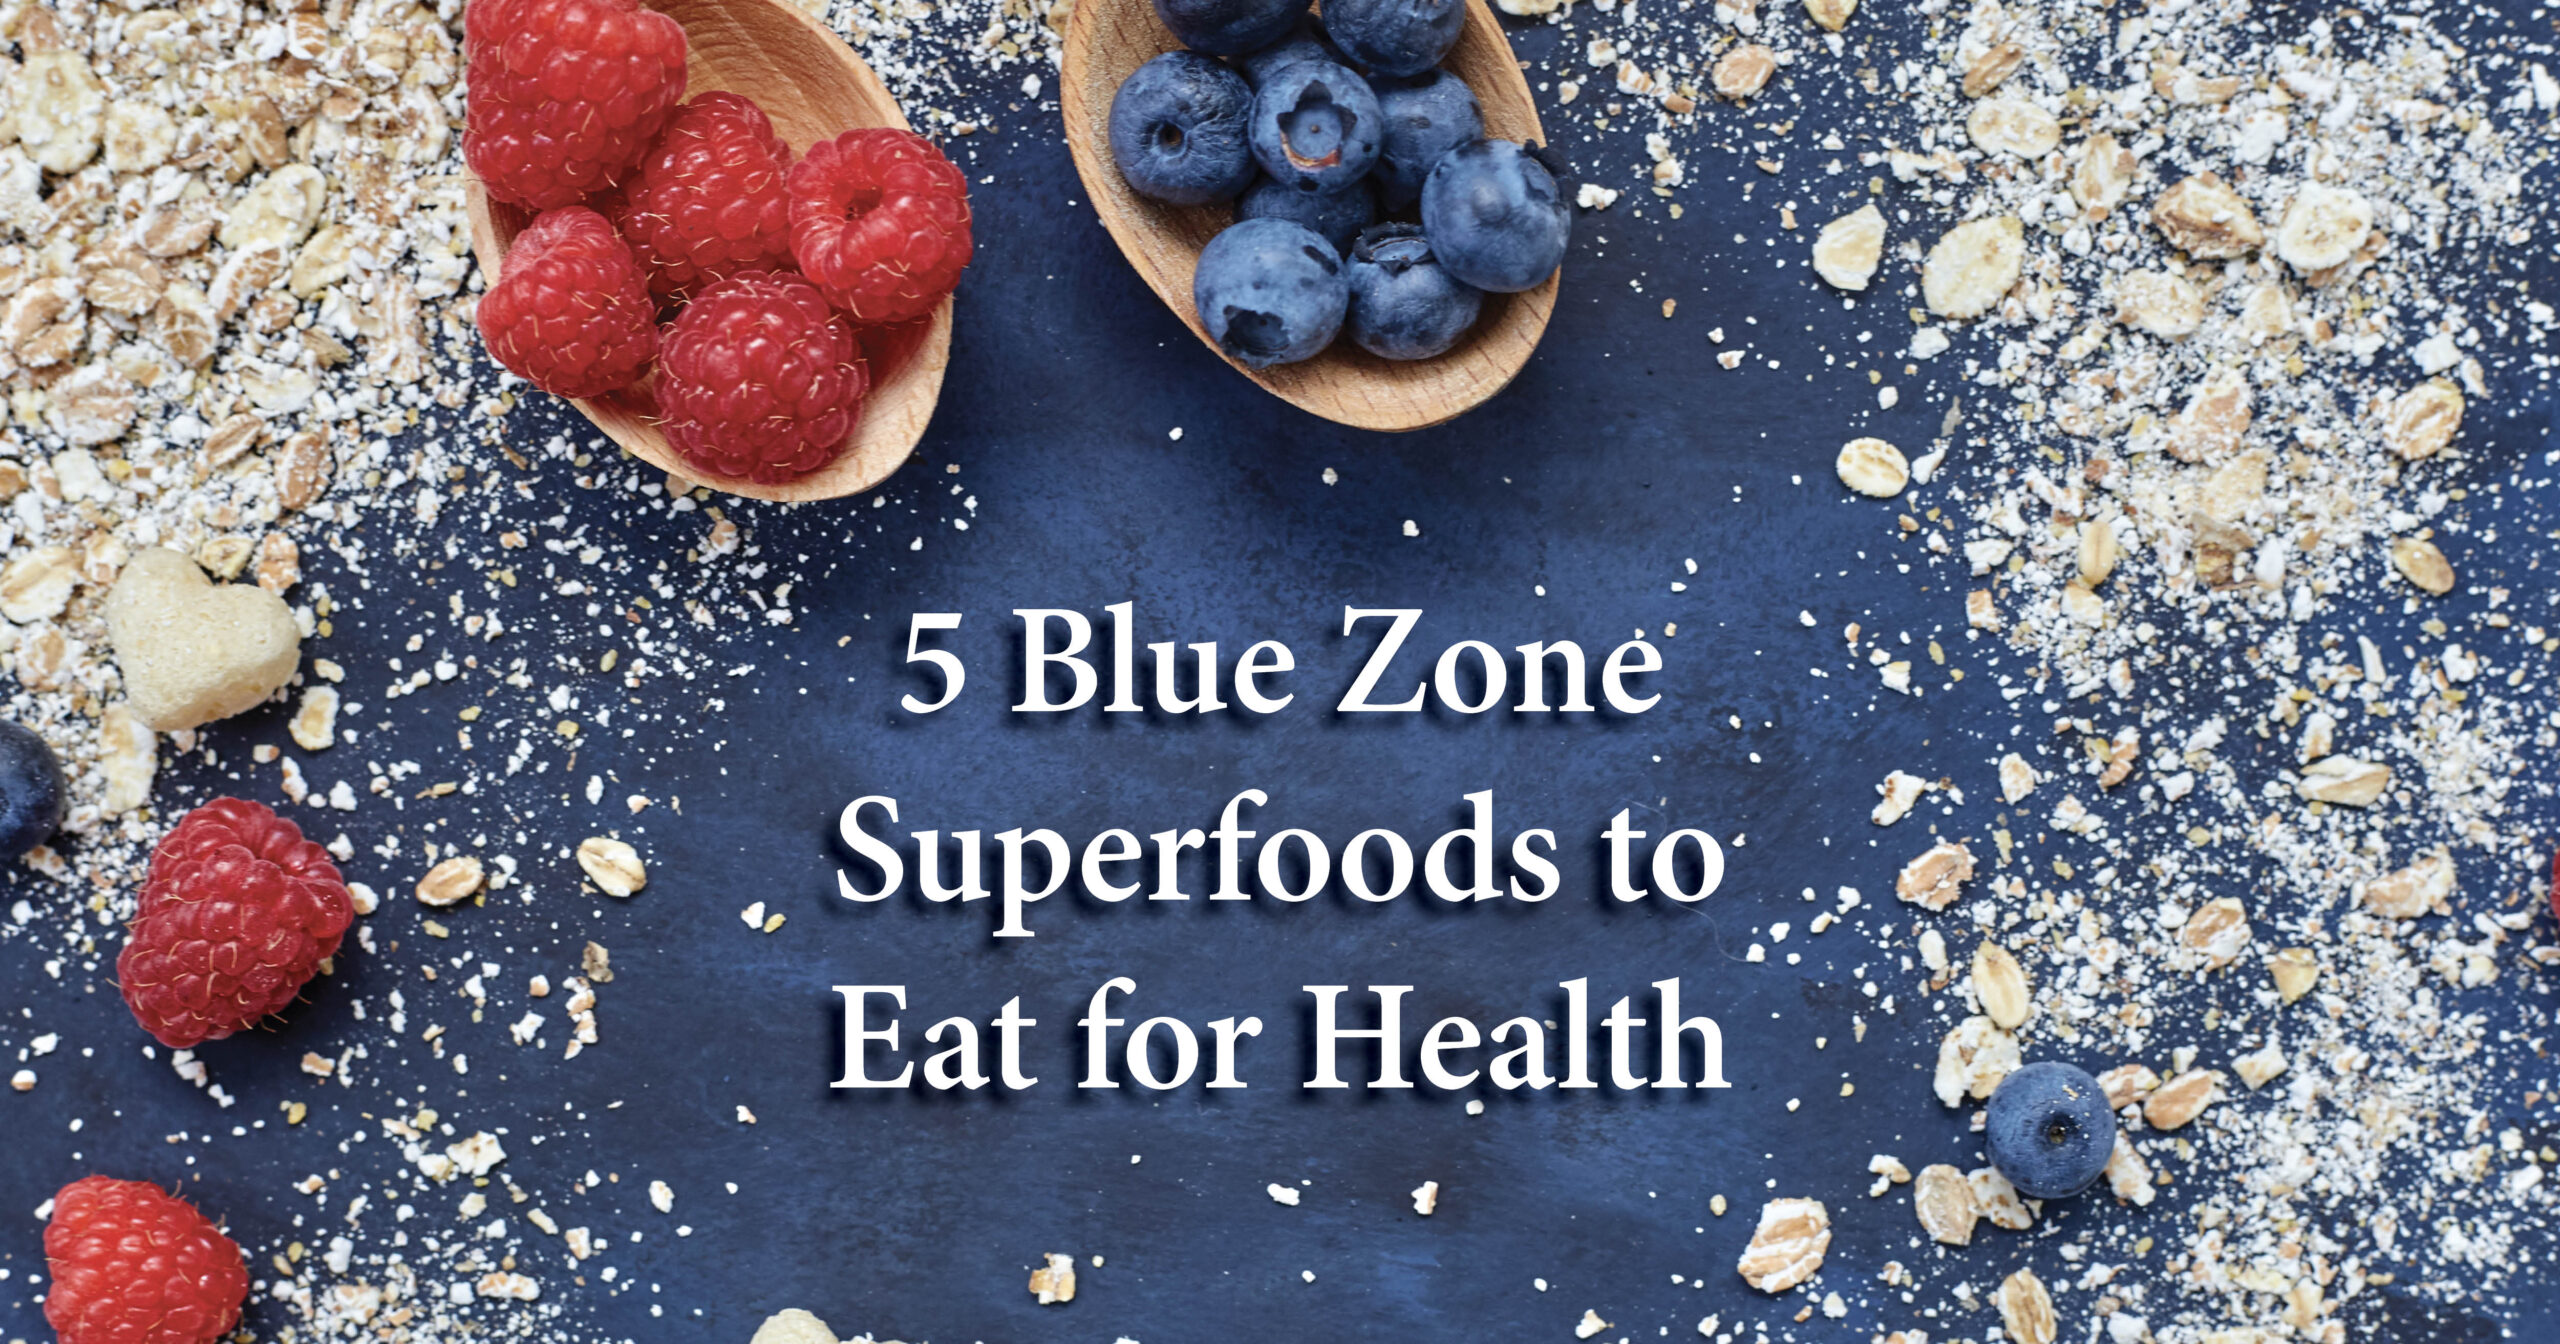 National Nutrition Month: 5 Blue Zone Superfoods to Eat for Health